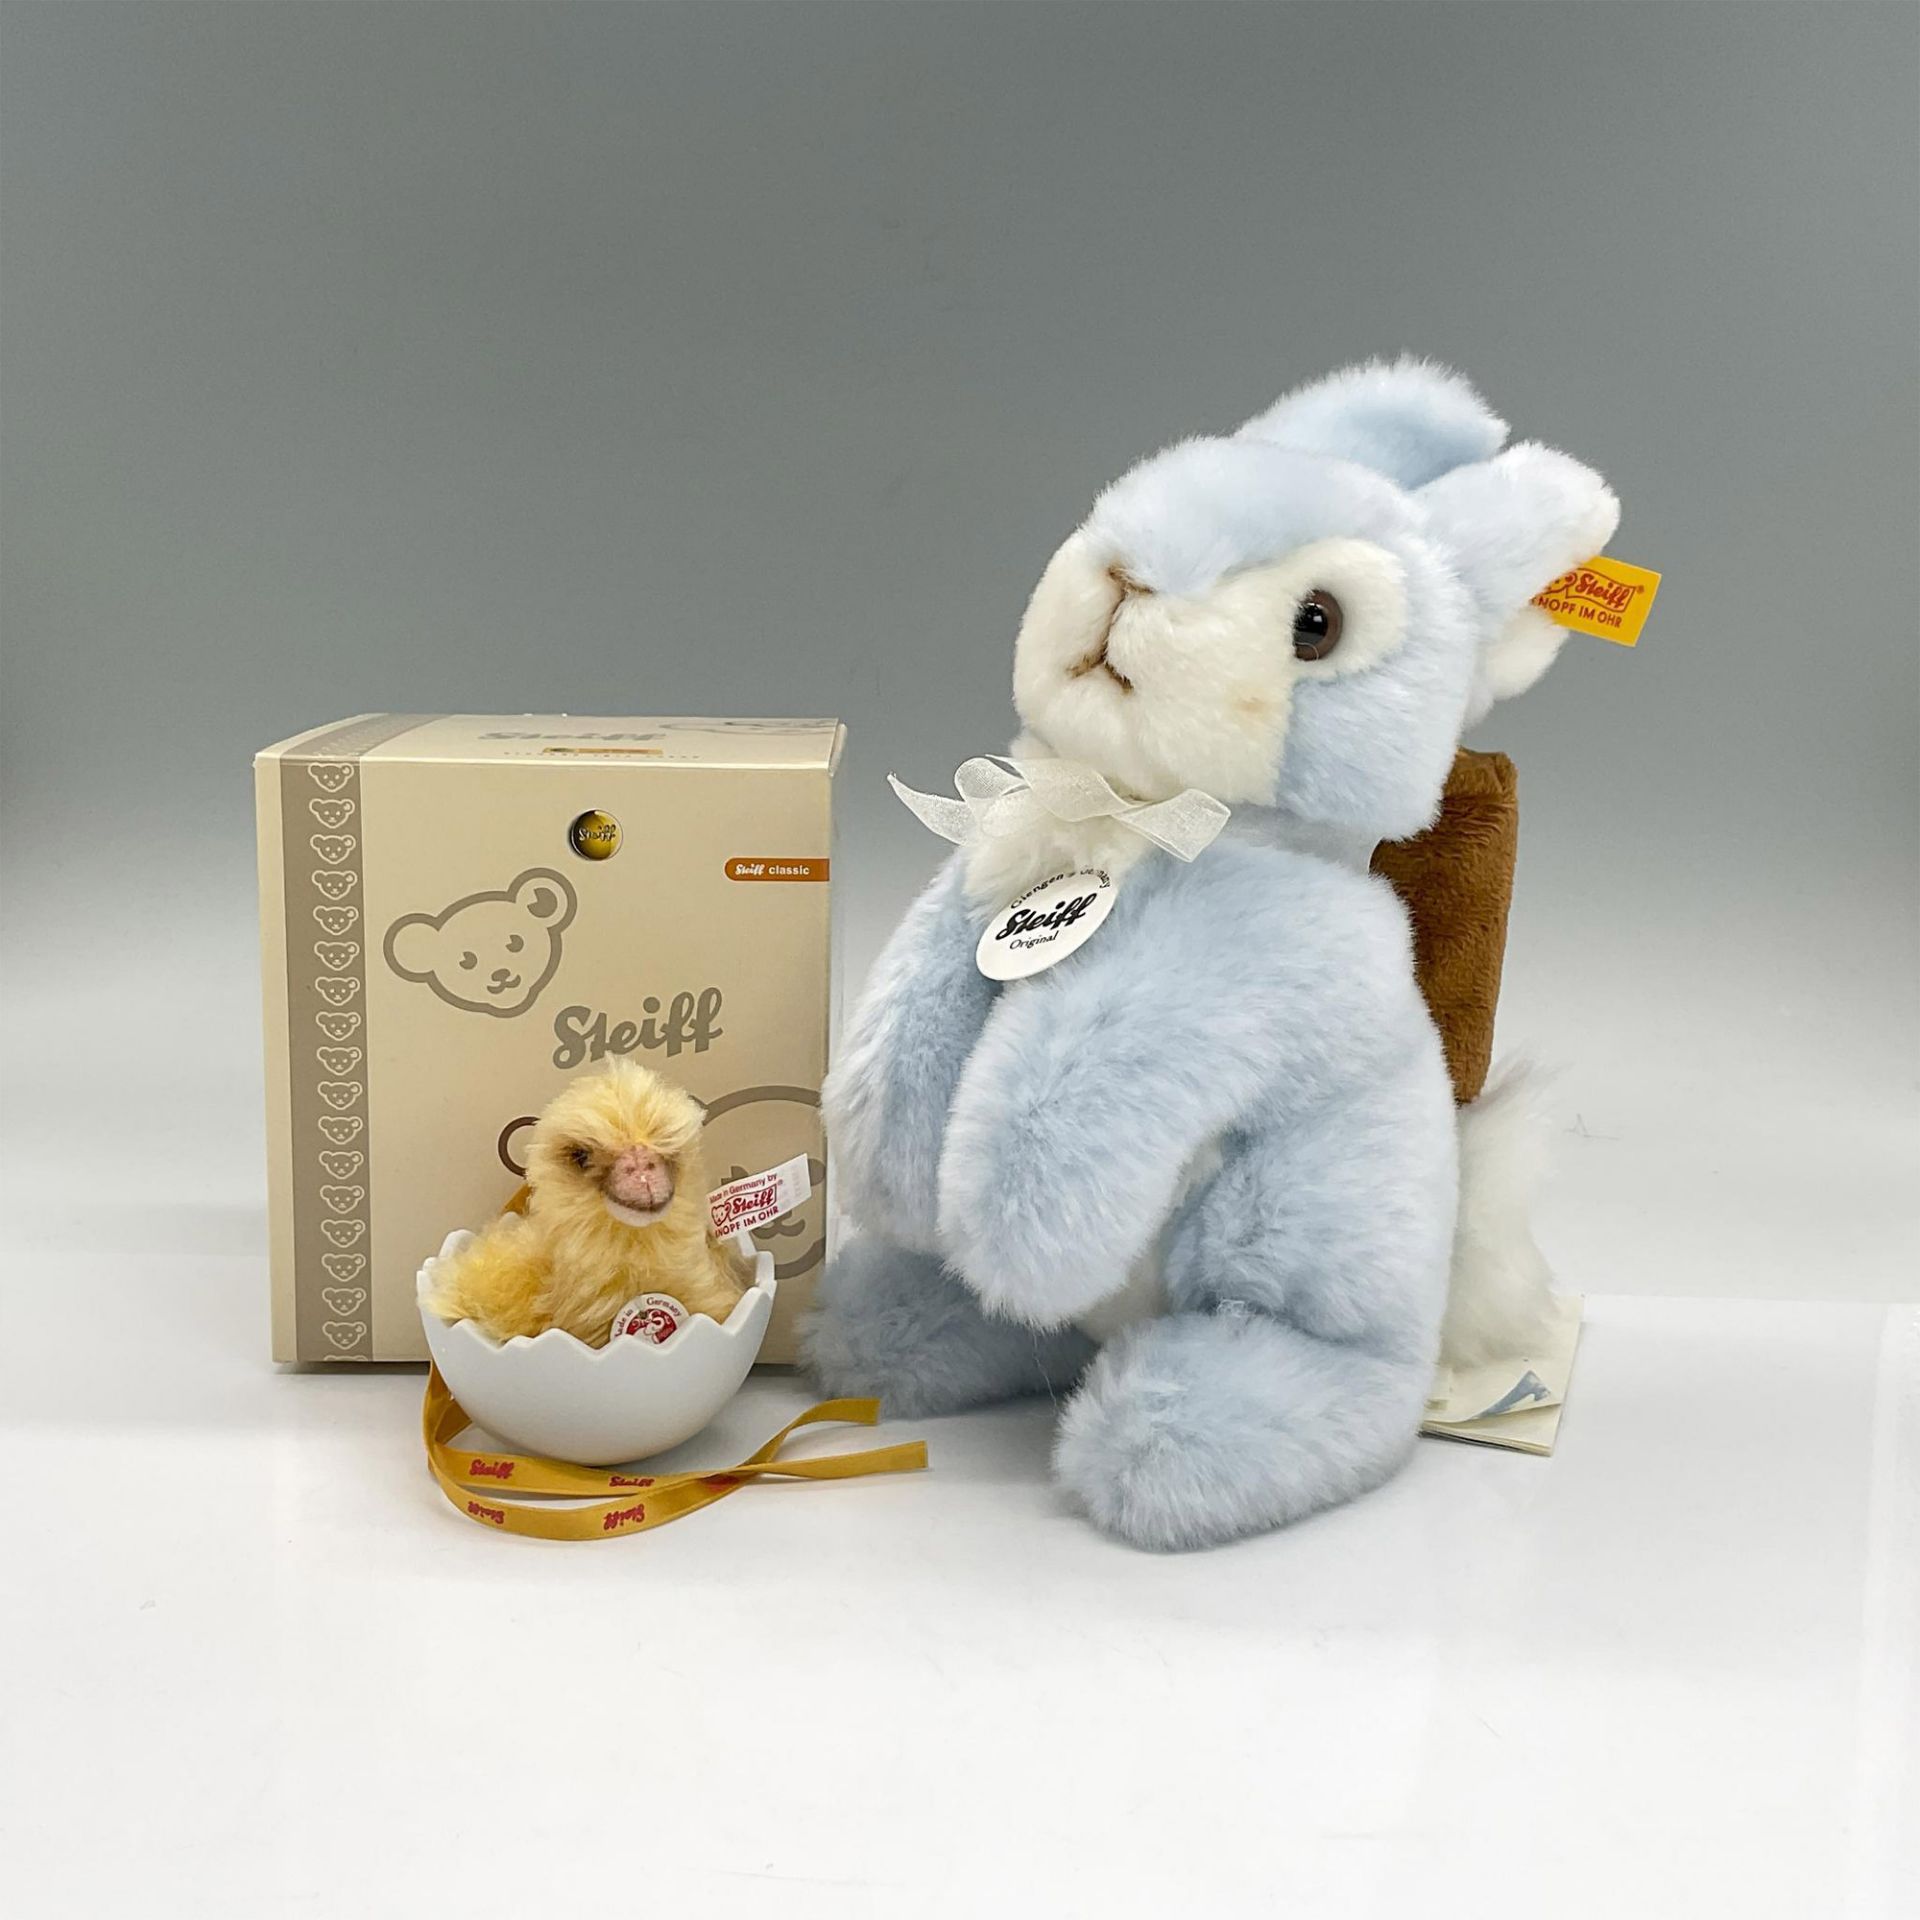 2pc Steiff Chick in Egg Ornament + Plush Blue Bunny - Image 5 of 5